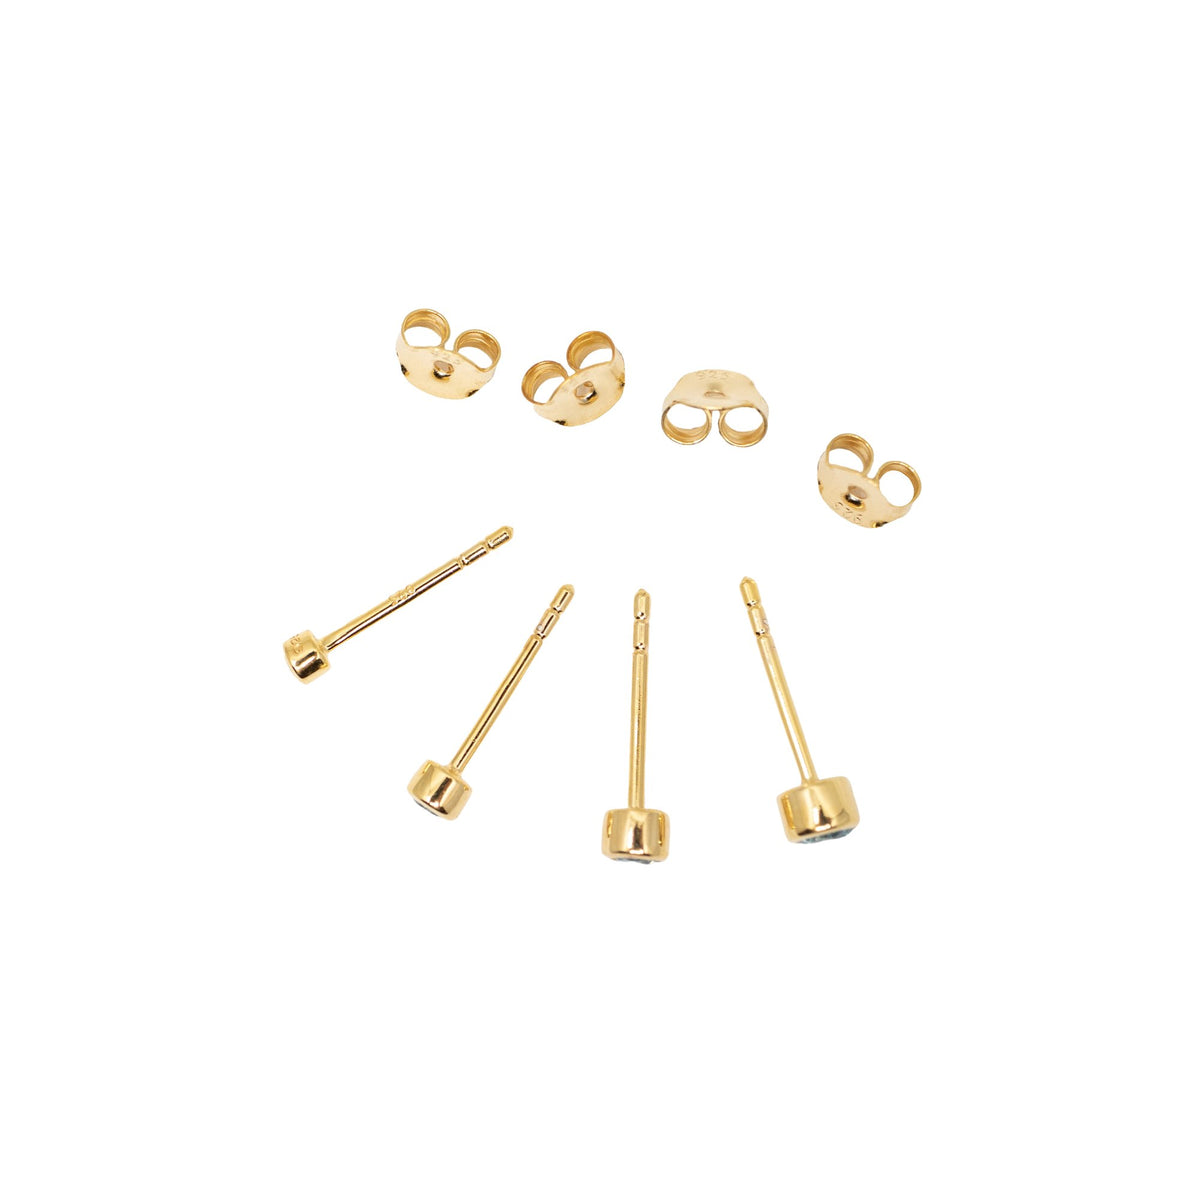 Yellow Gold Studs Graduated White Topaz Stud Earring Set The Curated Lobe